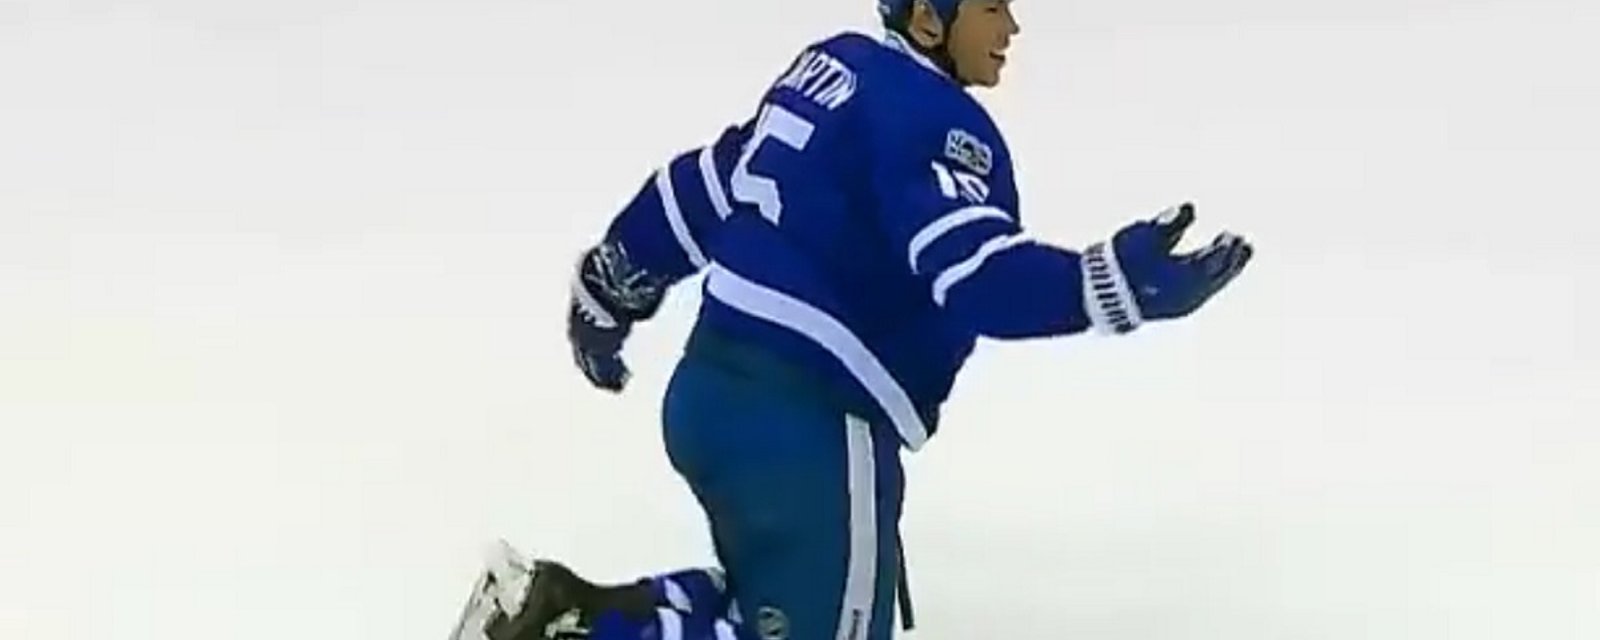 Matt Martin loses an edge, and what happens next is hilarious.